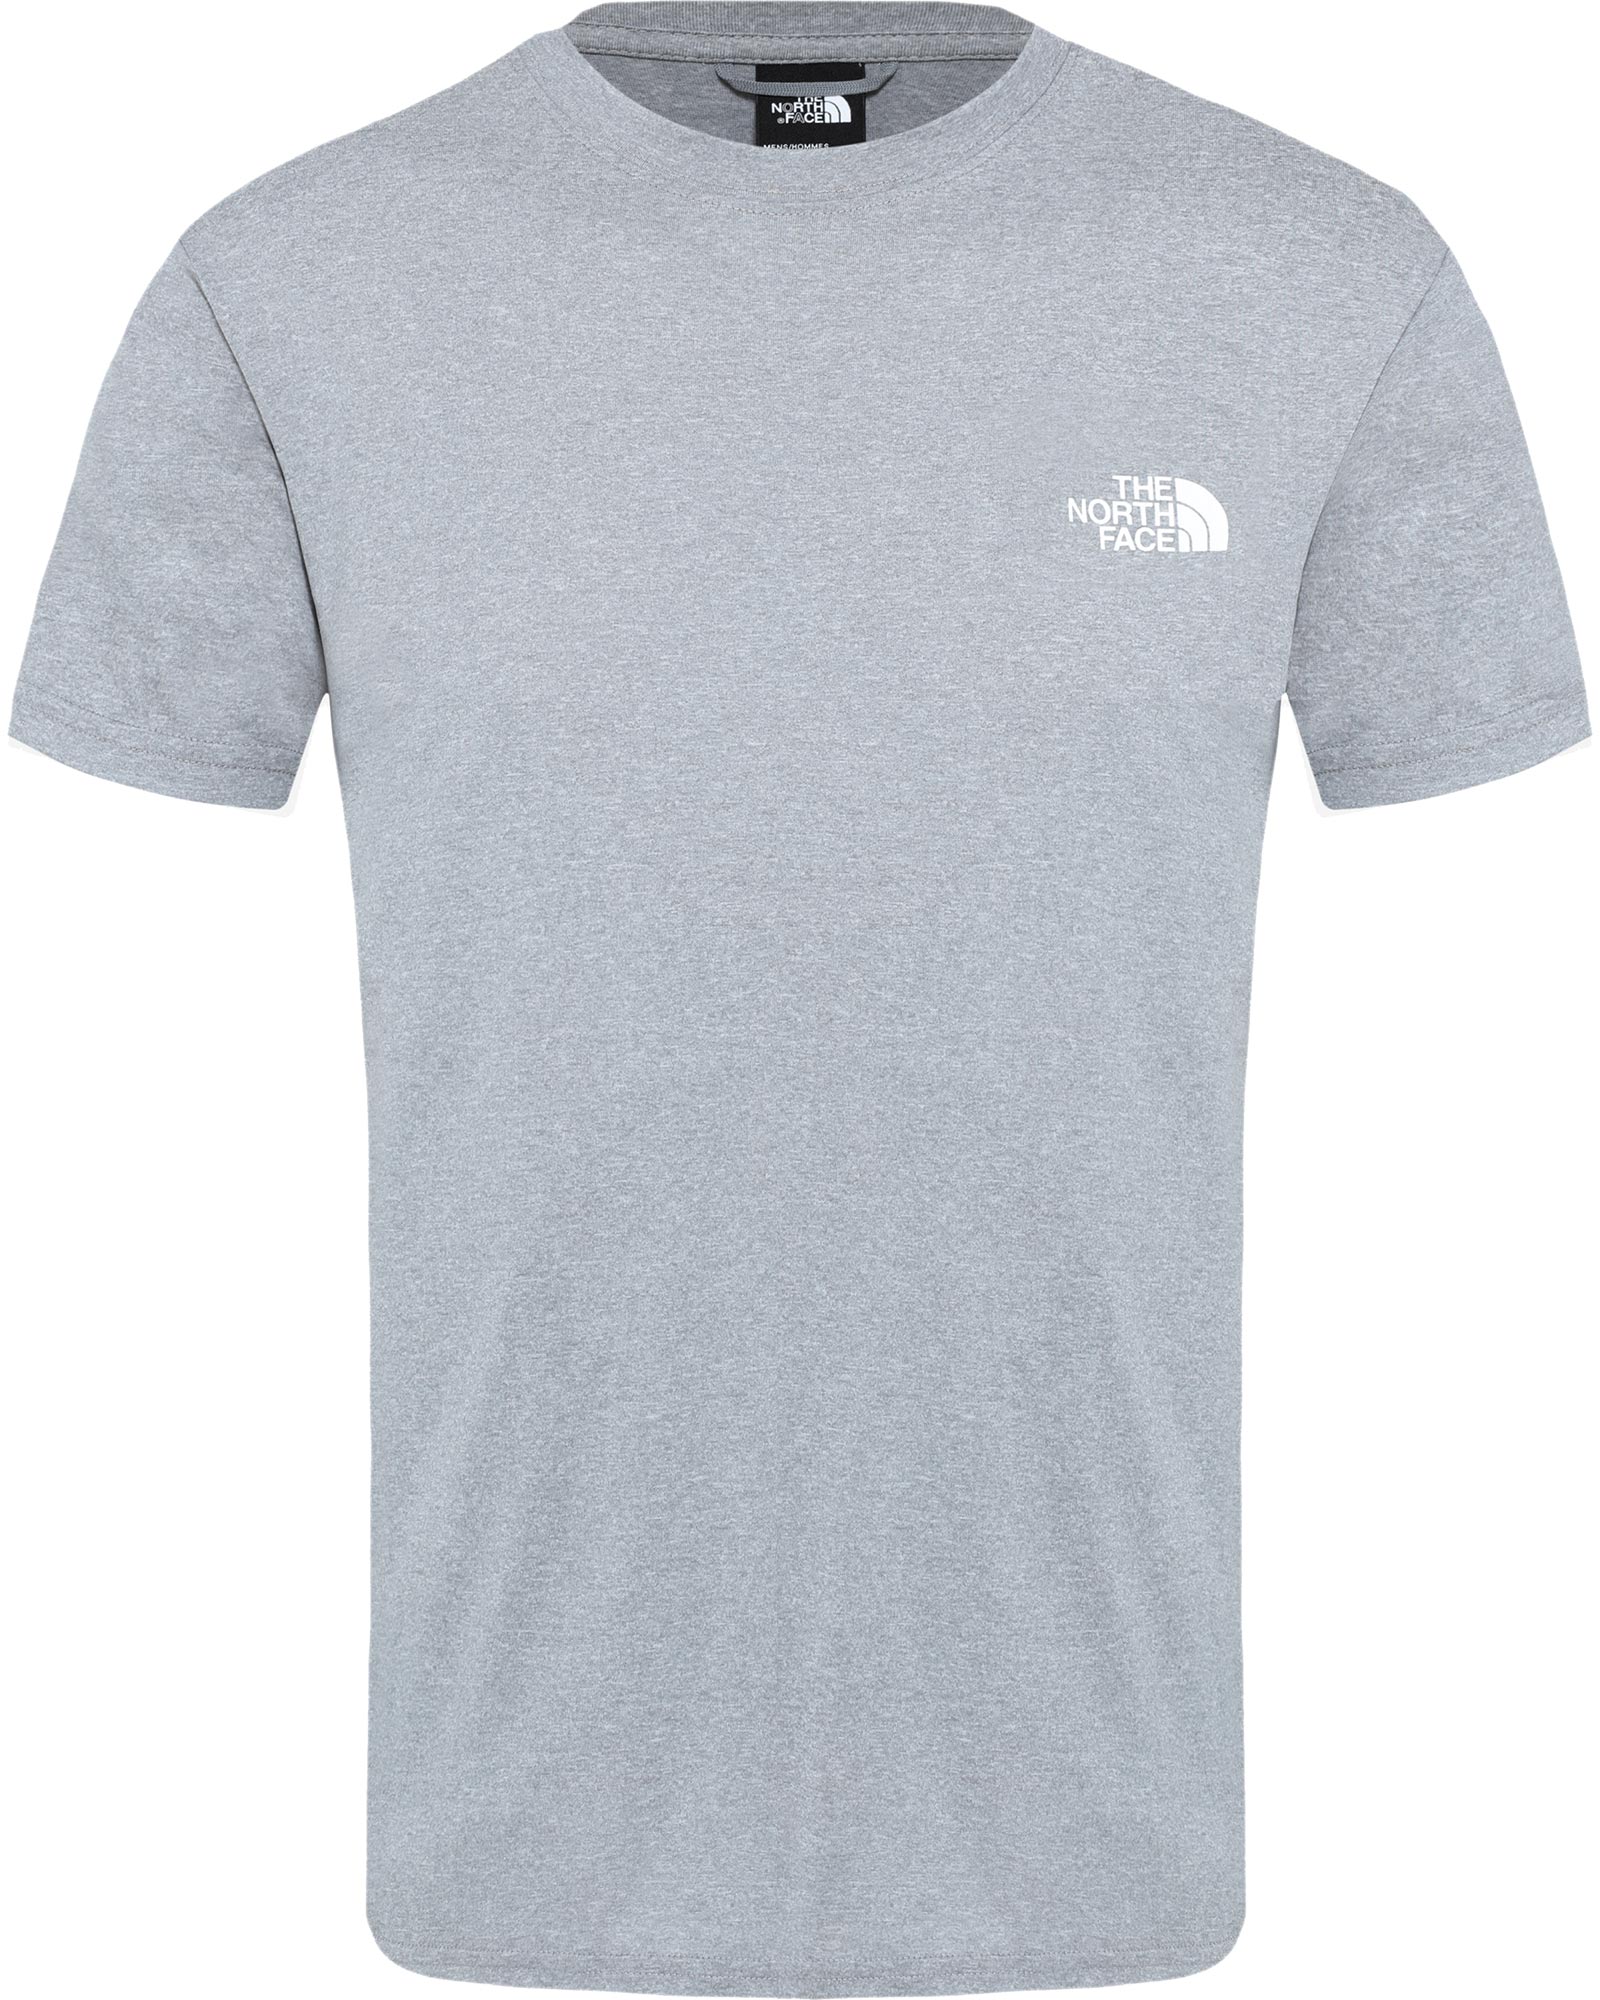 The North Face Reaxion Red Box Men’s T Shirt - Mid Grey Heather S